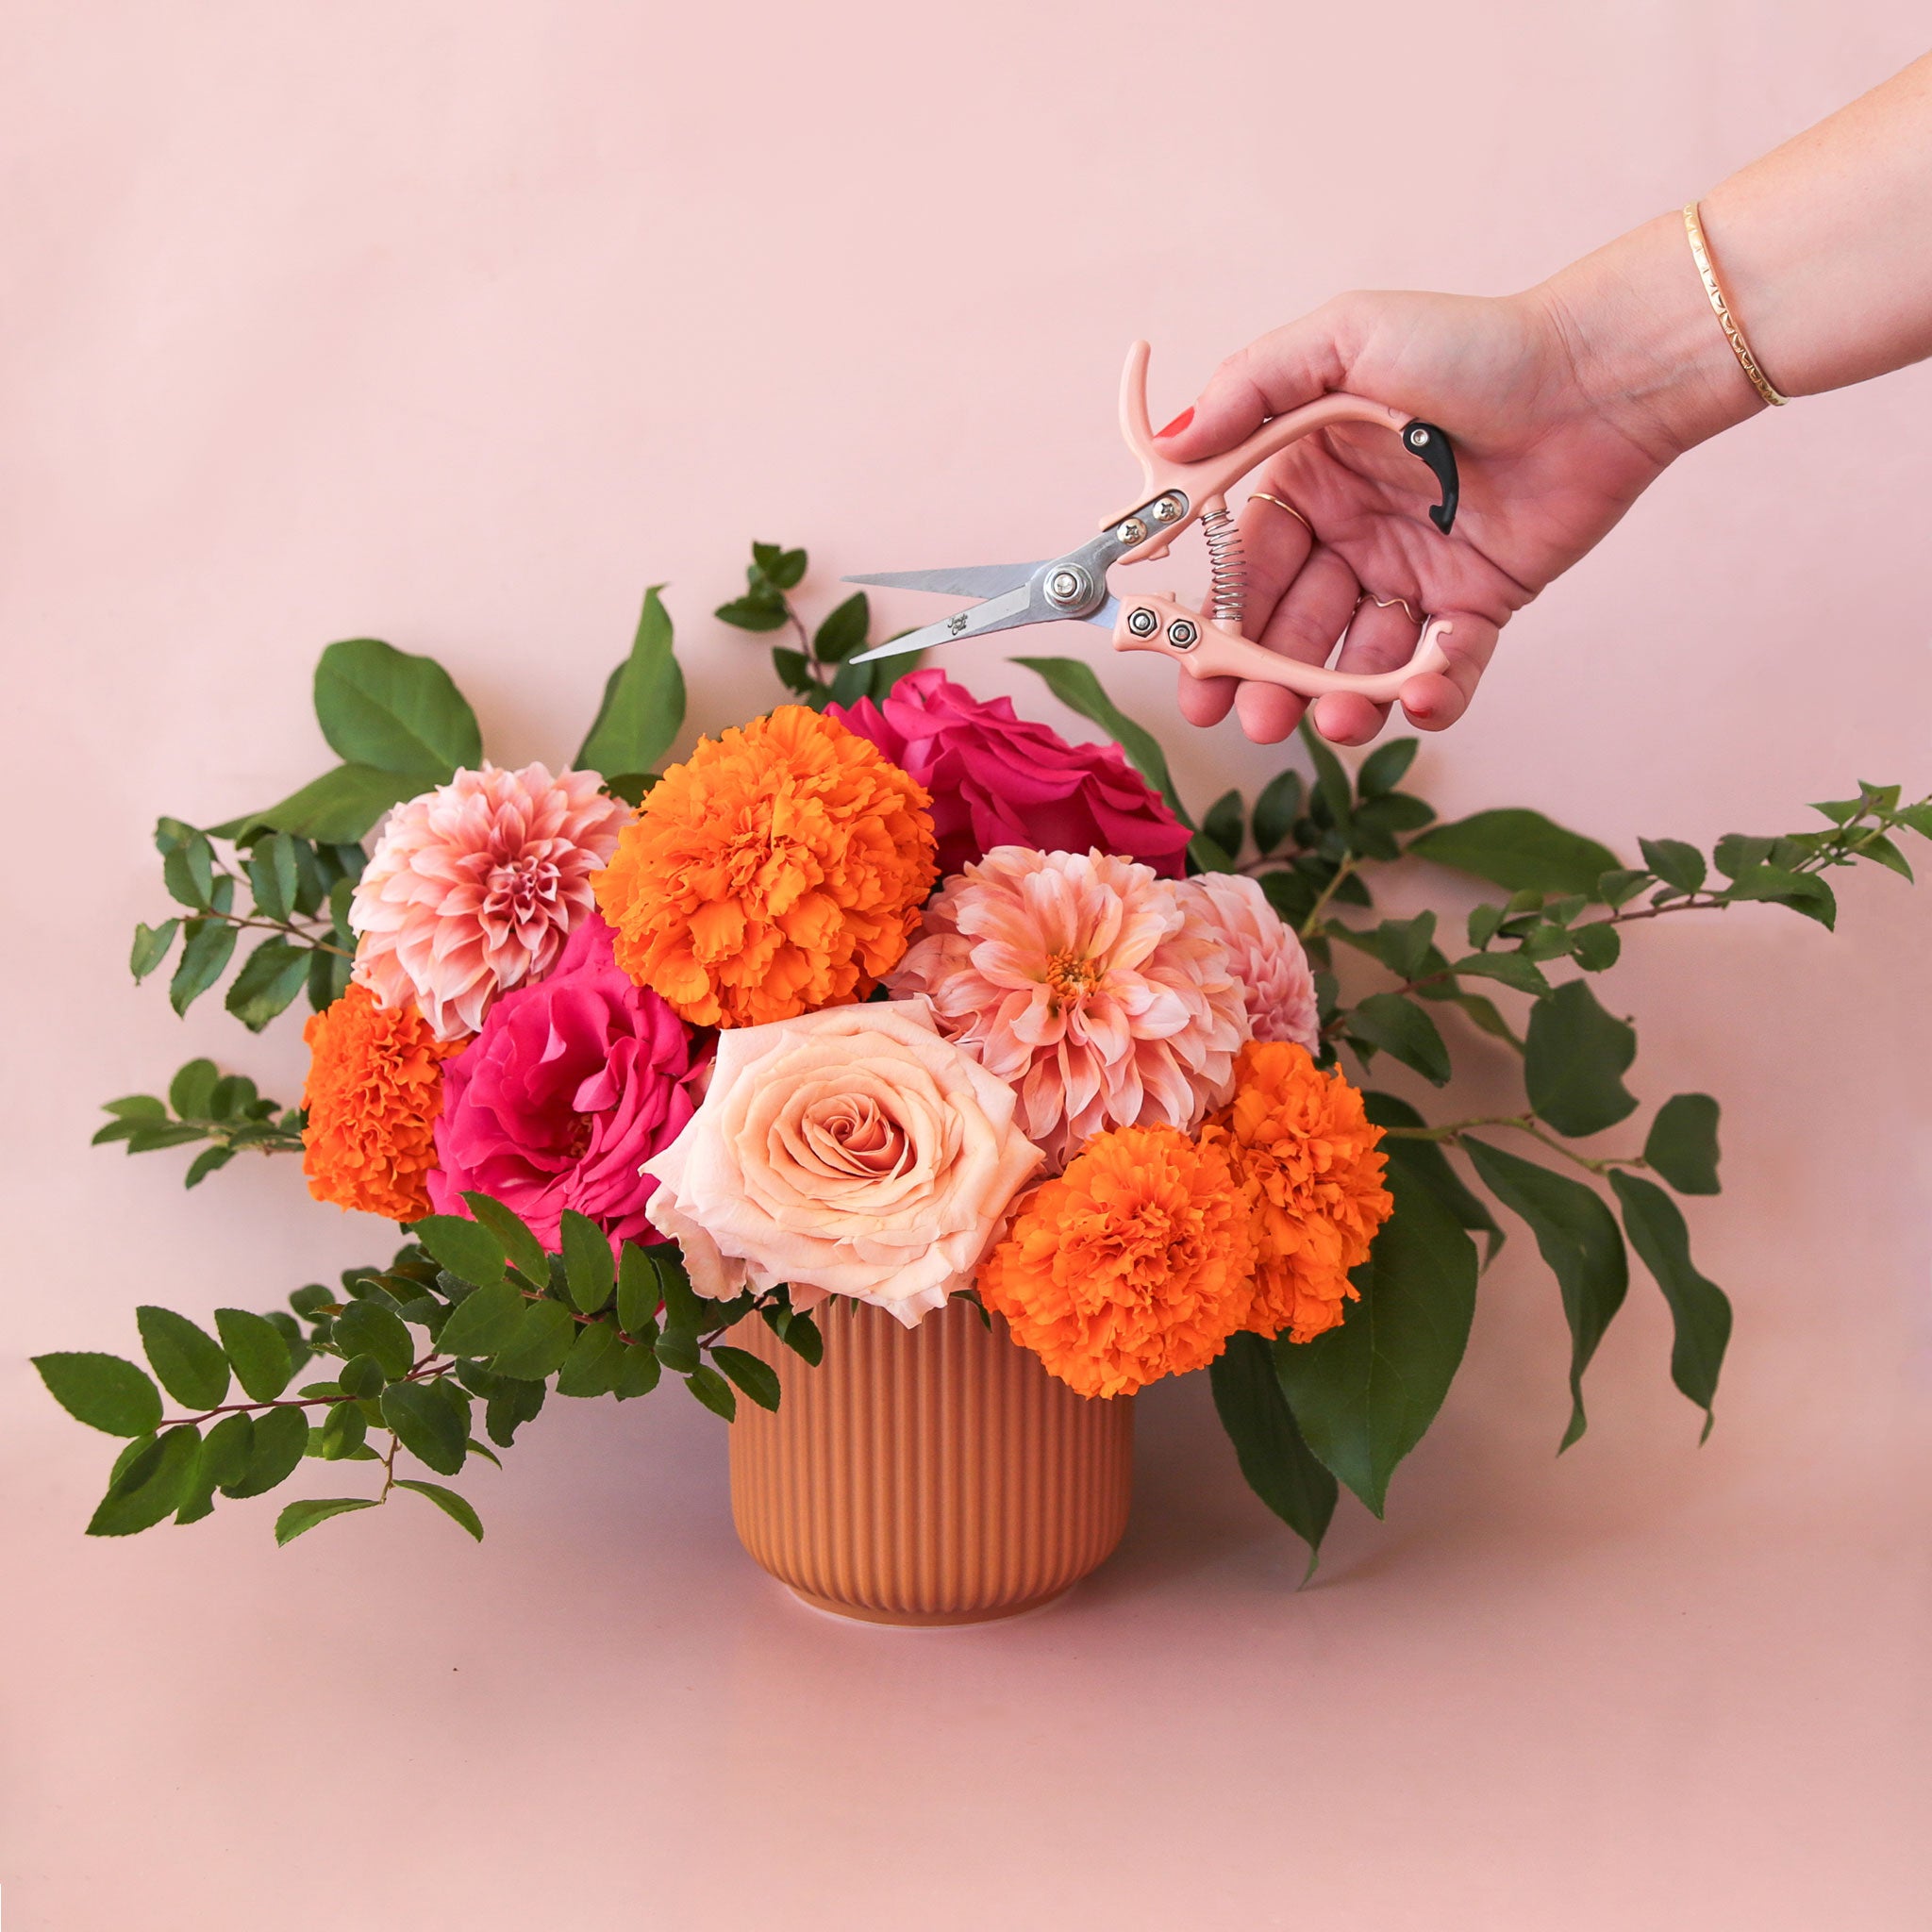 a floral arrangement with flowers of pink and orange sits in a terracotta fluted pot with a handing reaching in holding a pair of pruning shears